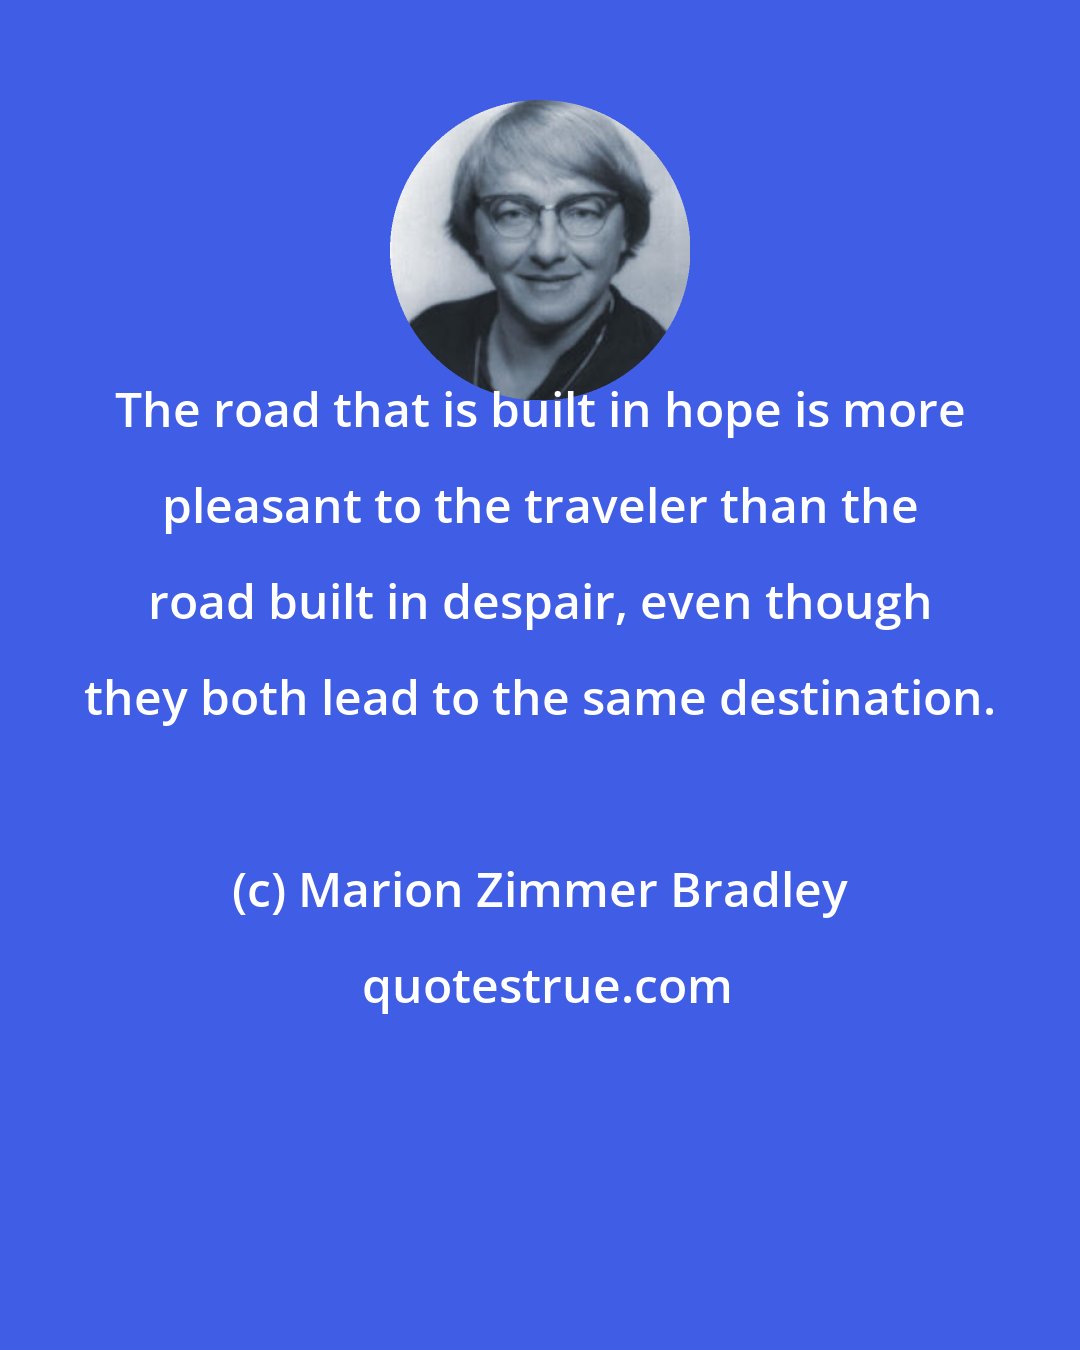 Marion Zimmer Bradley: The road that is built in hope is more pleasant to the traveler than the road built in despair, even though they both lead to the same destination.